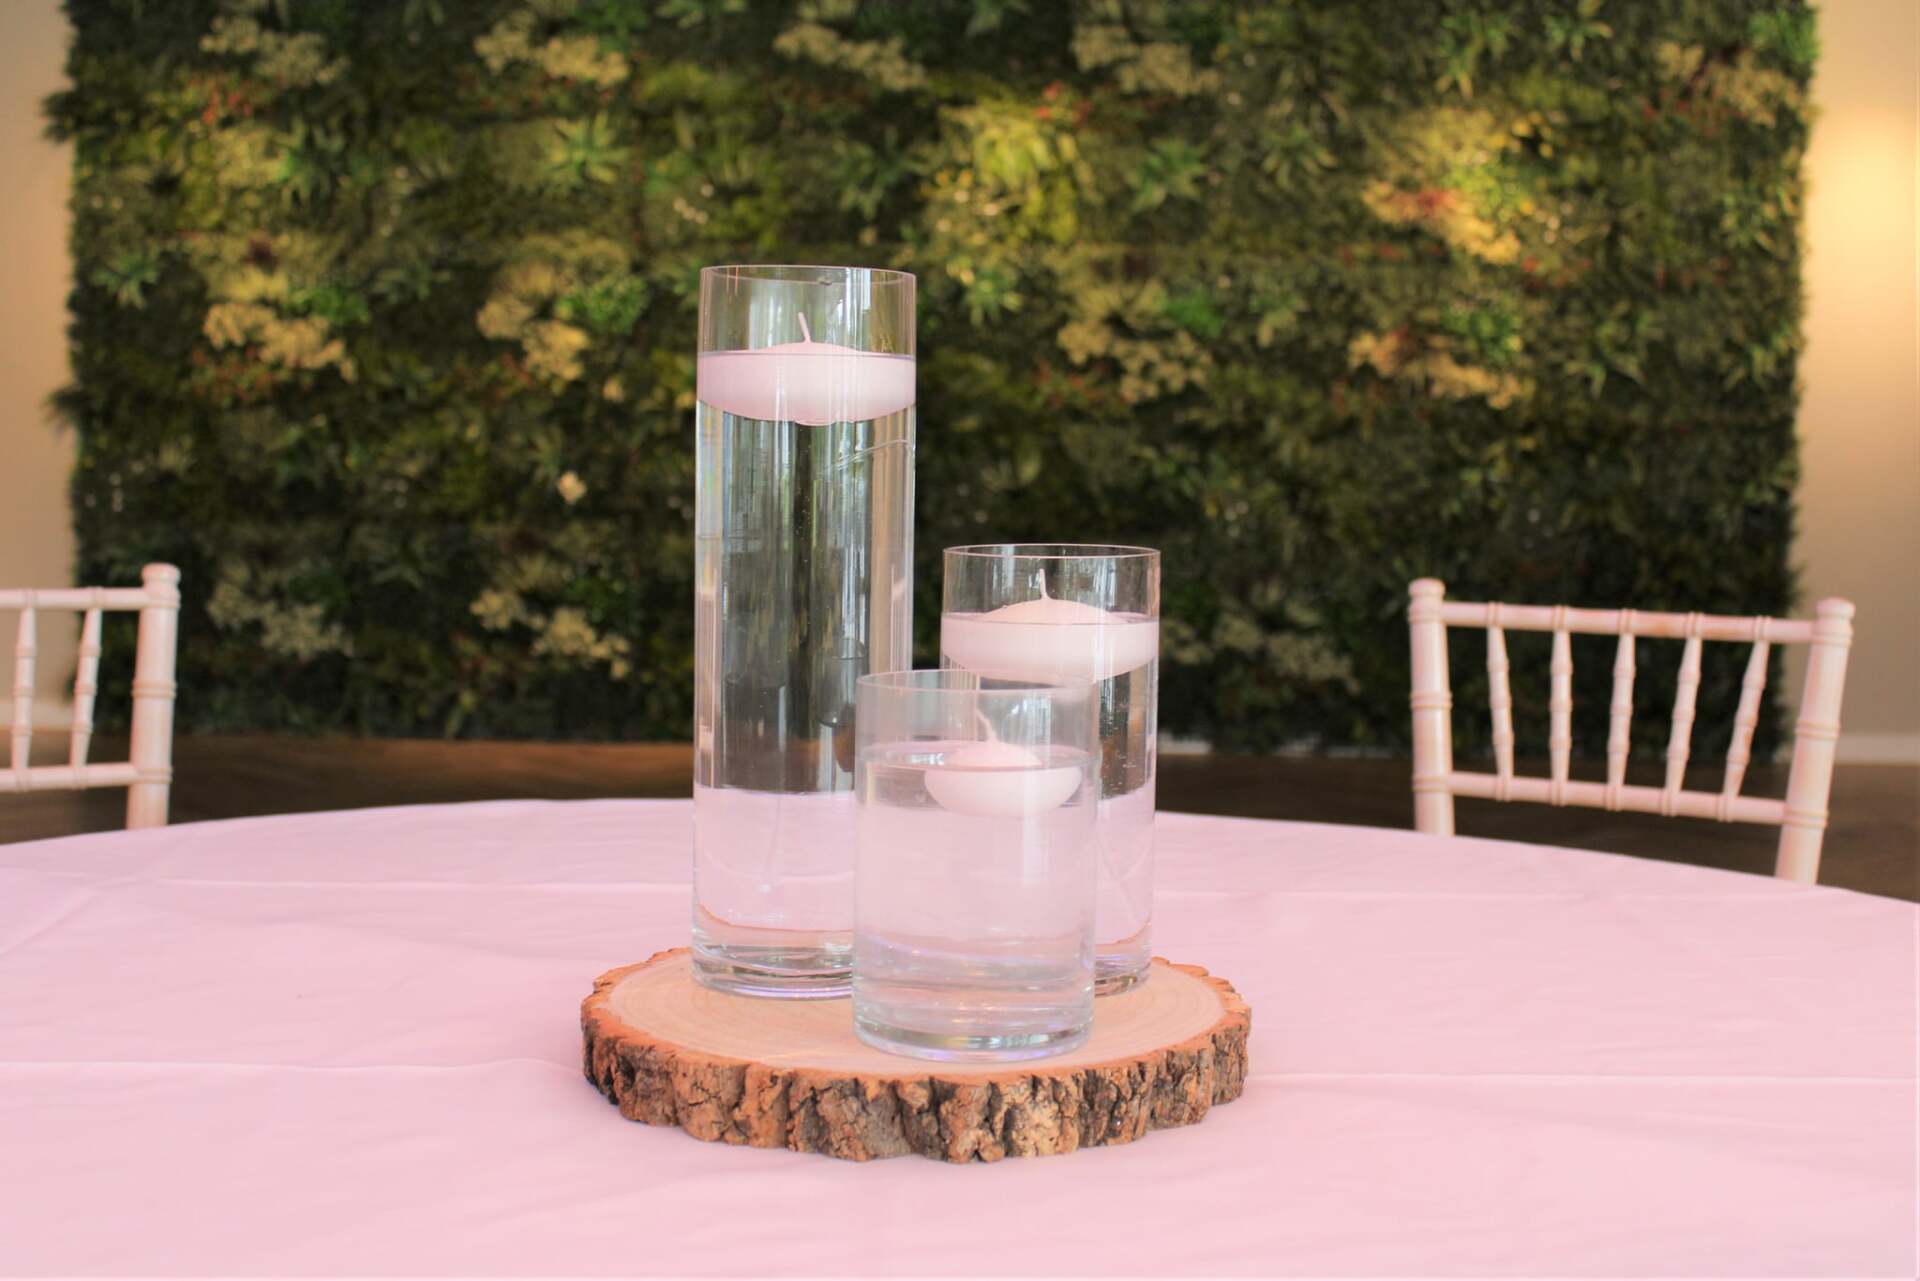 Cylinder vase centrepiece with floating candle